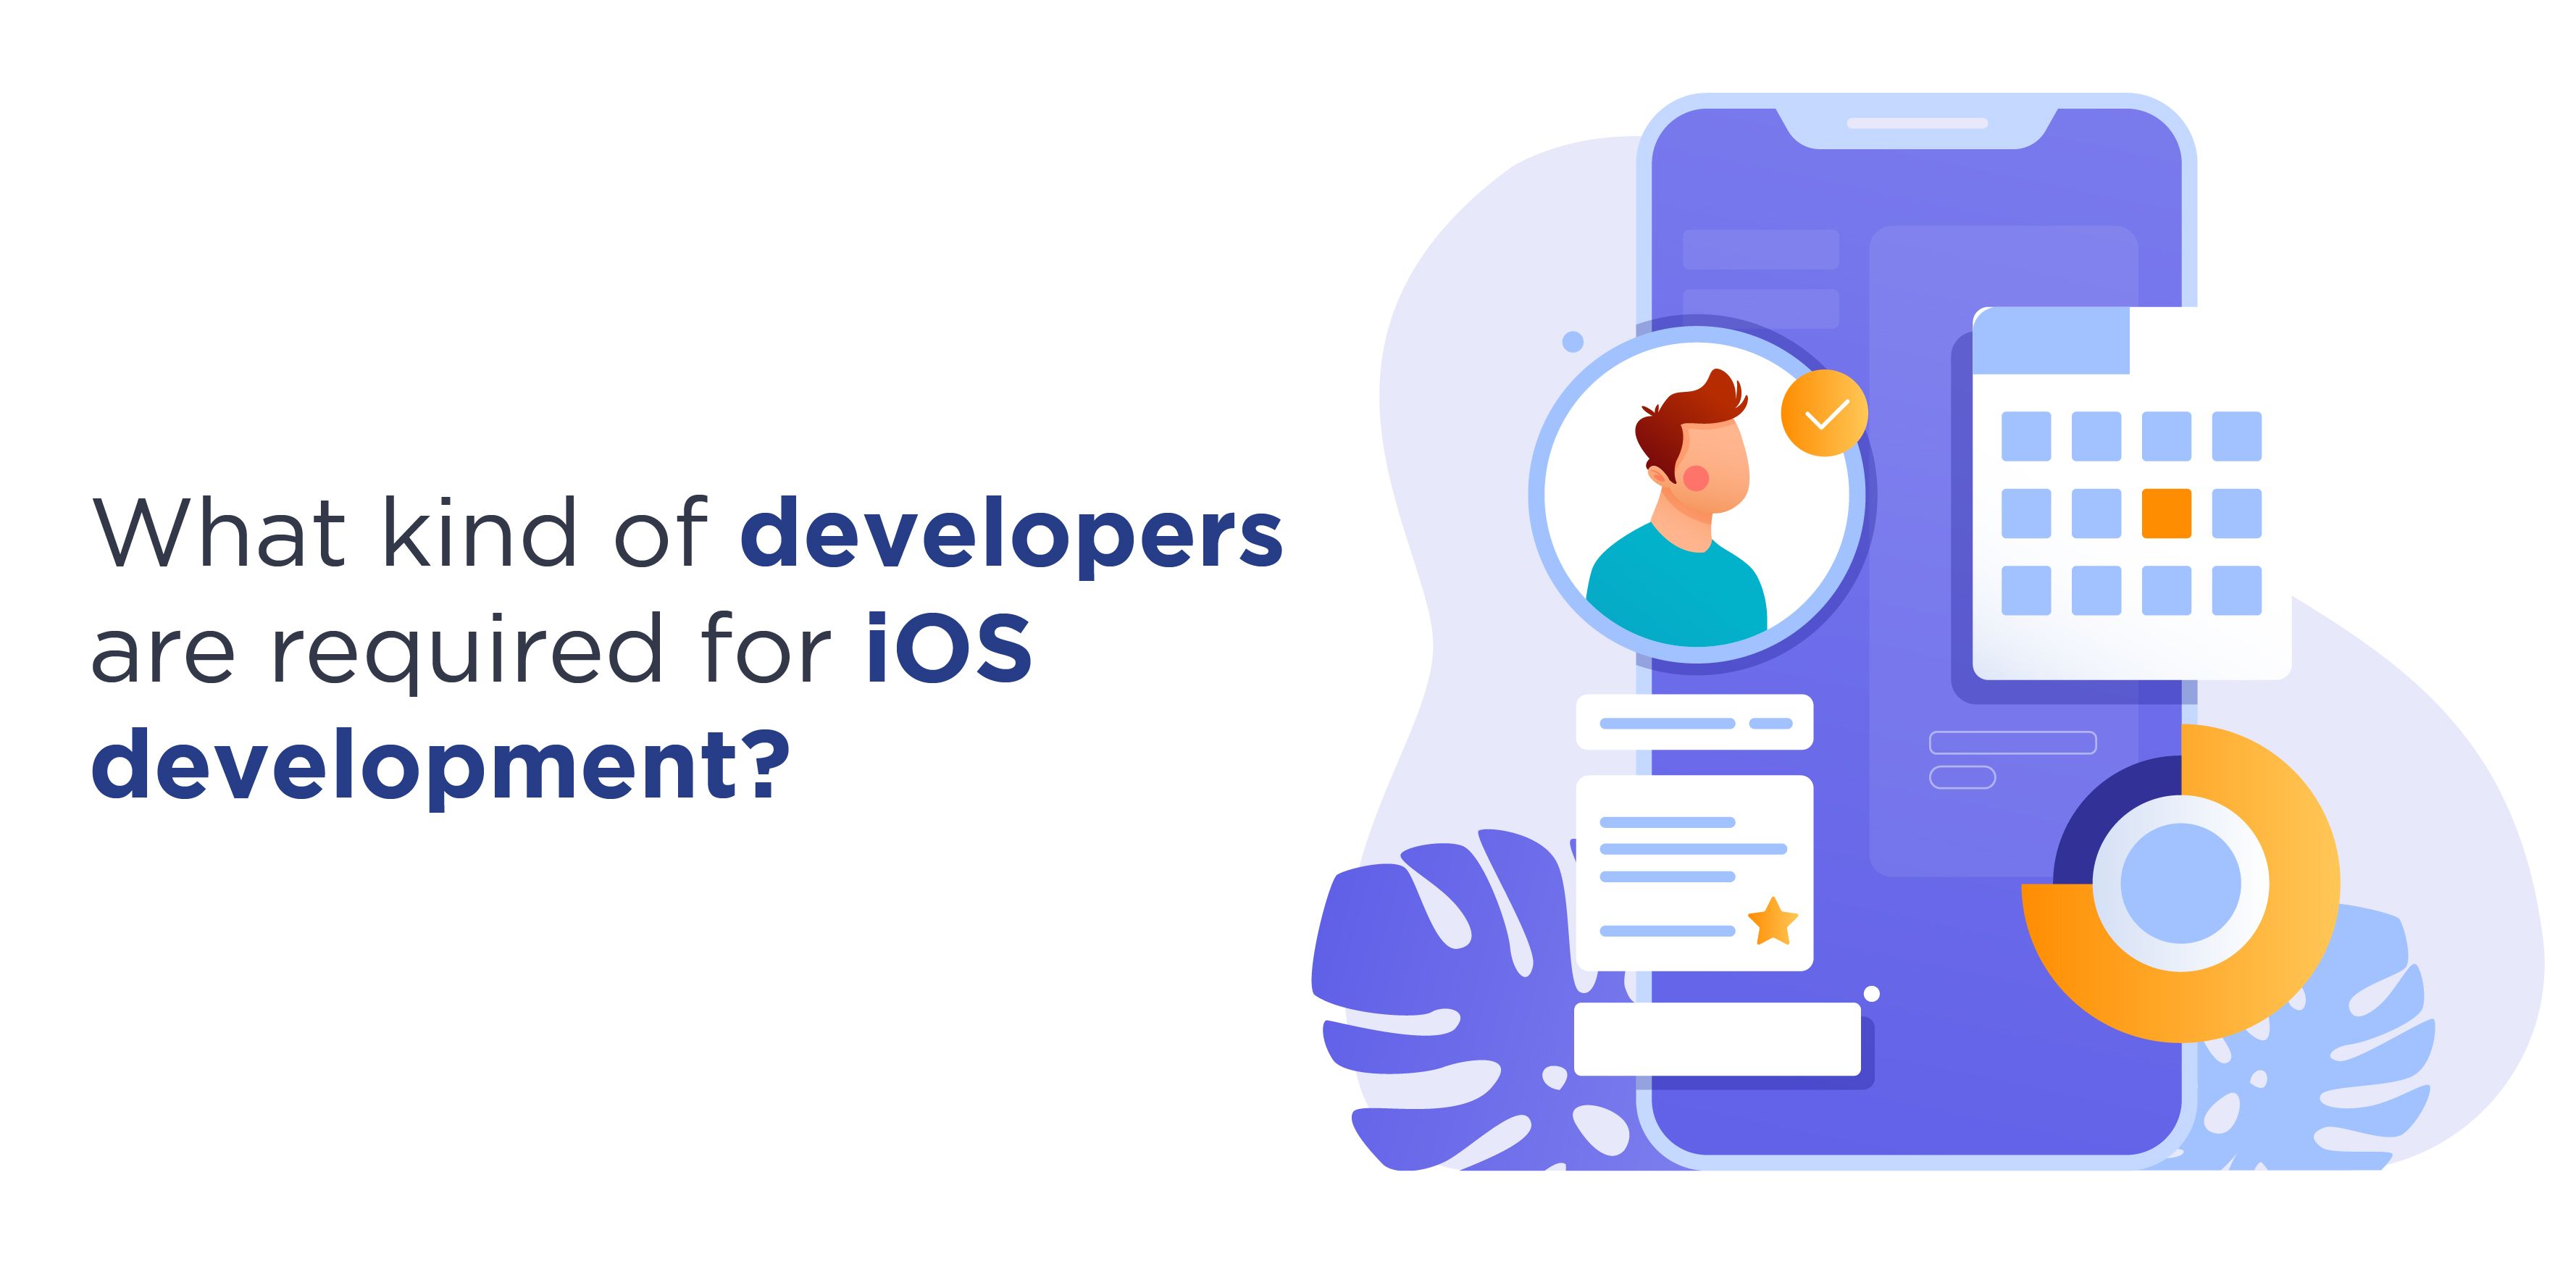 What kind of developers are required for iOS development?